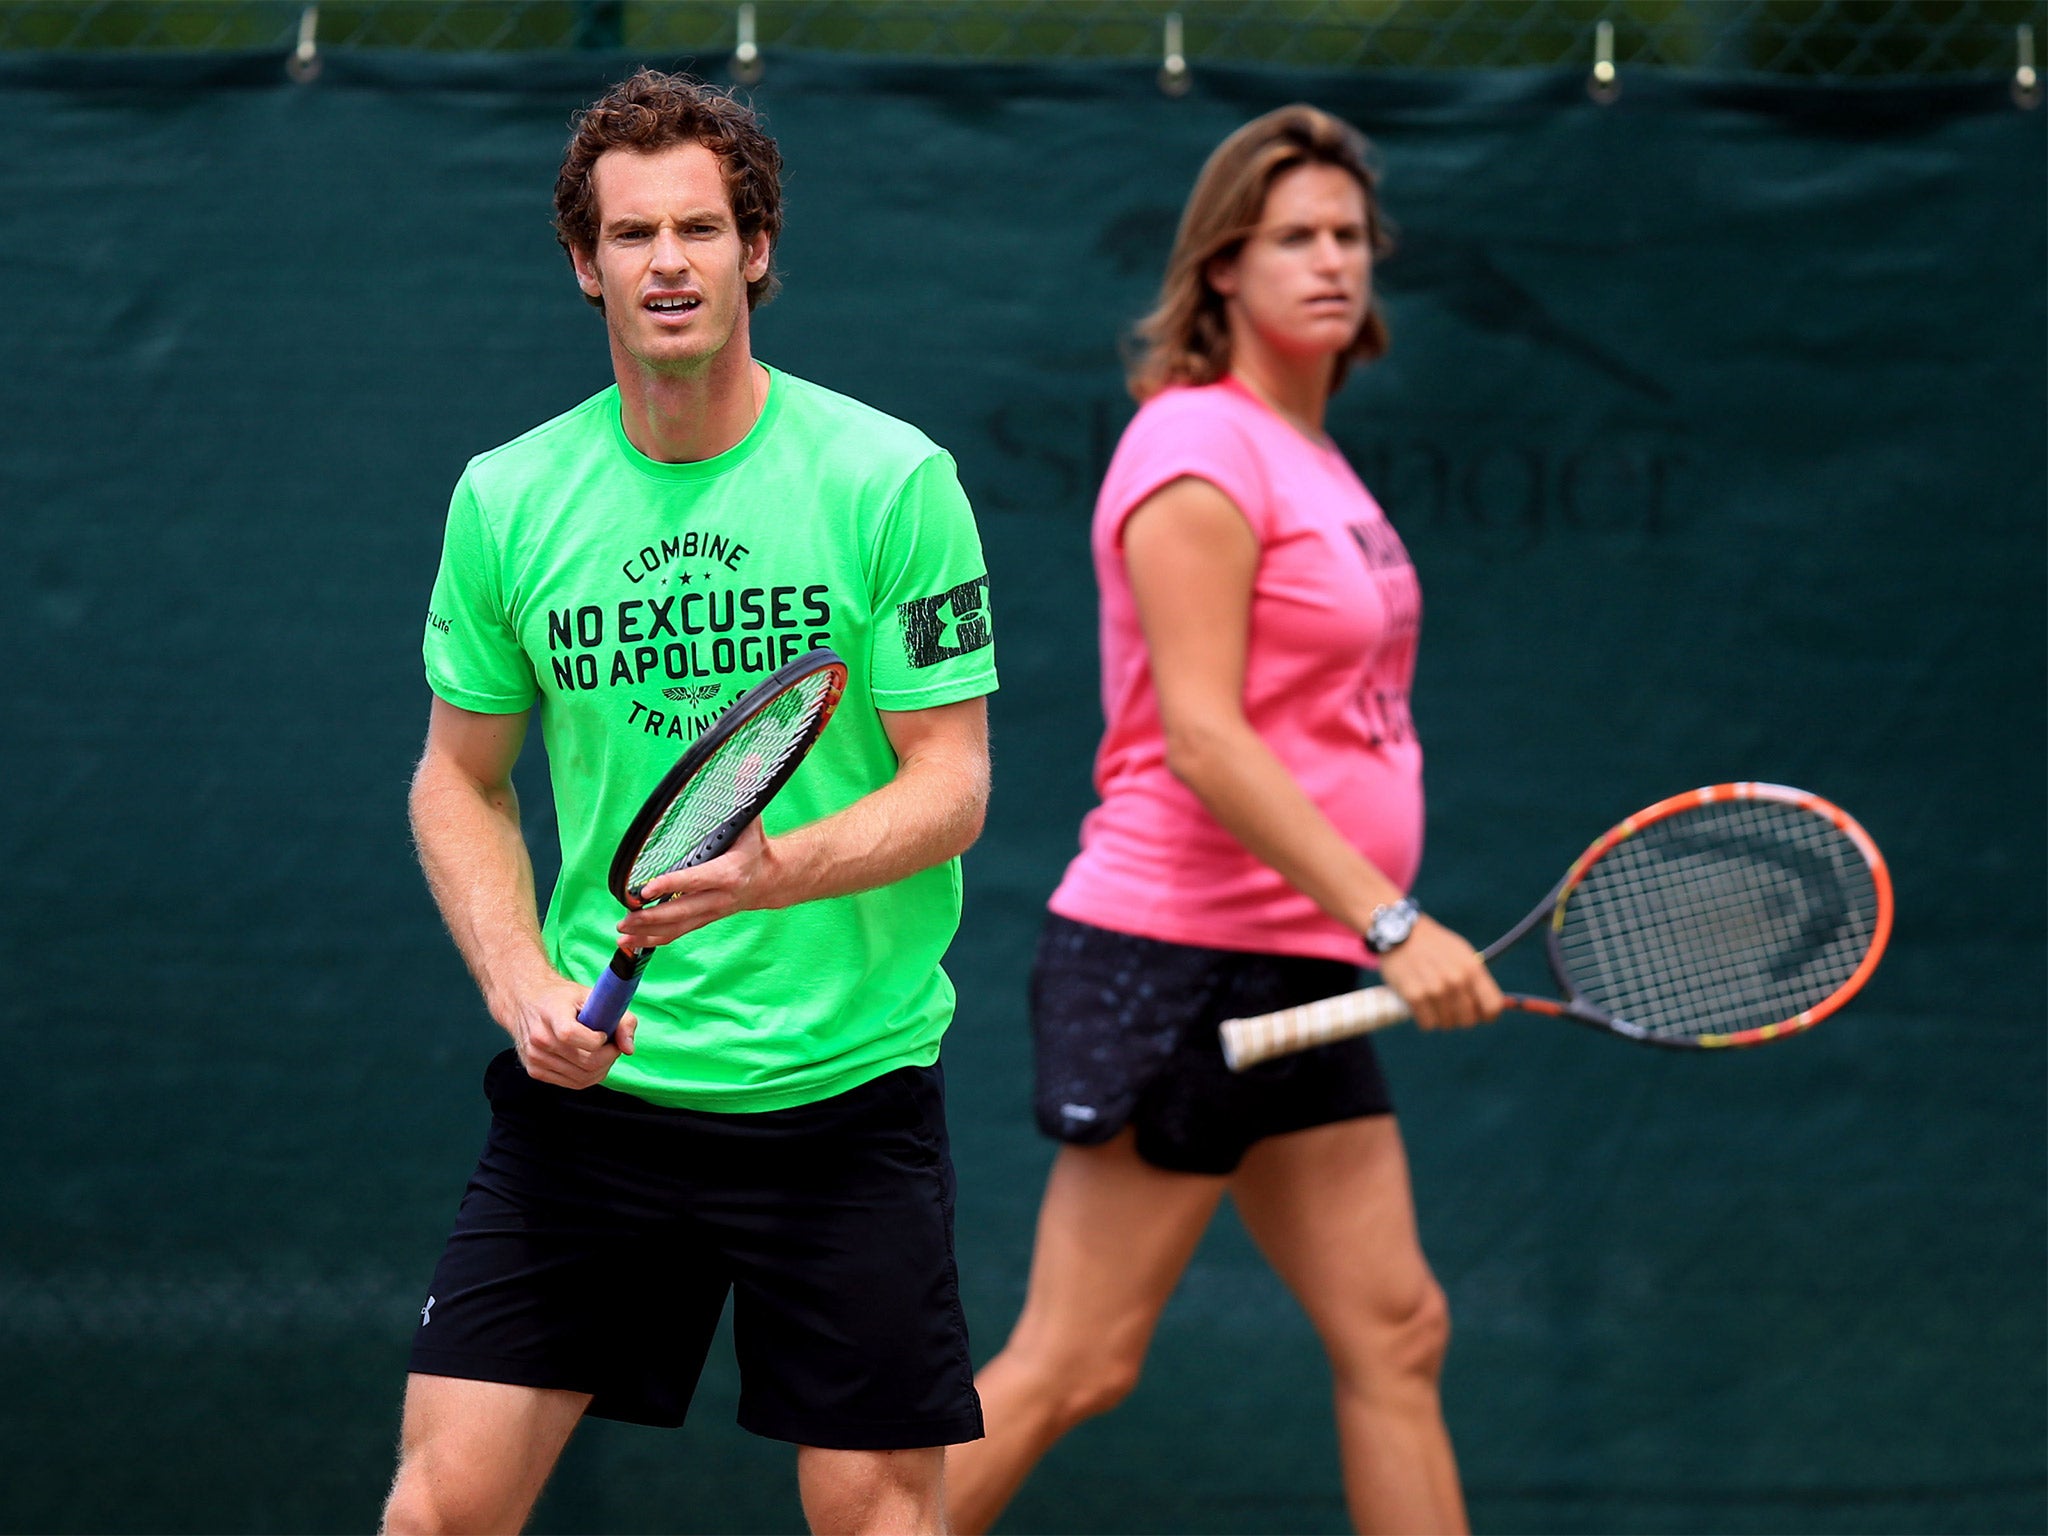 Andy Murray and coach Amélie Mauresmo during a practice session at Wimbledon